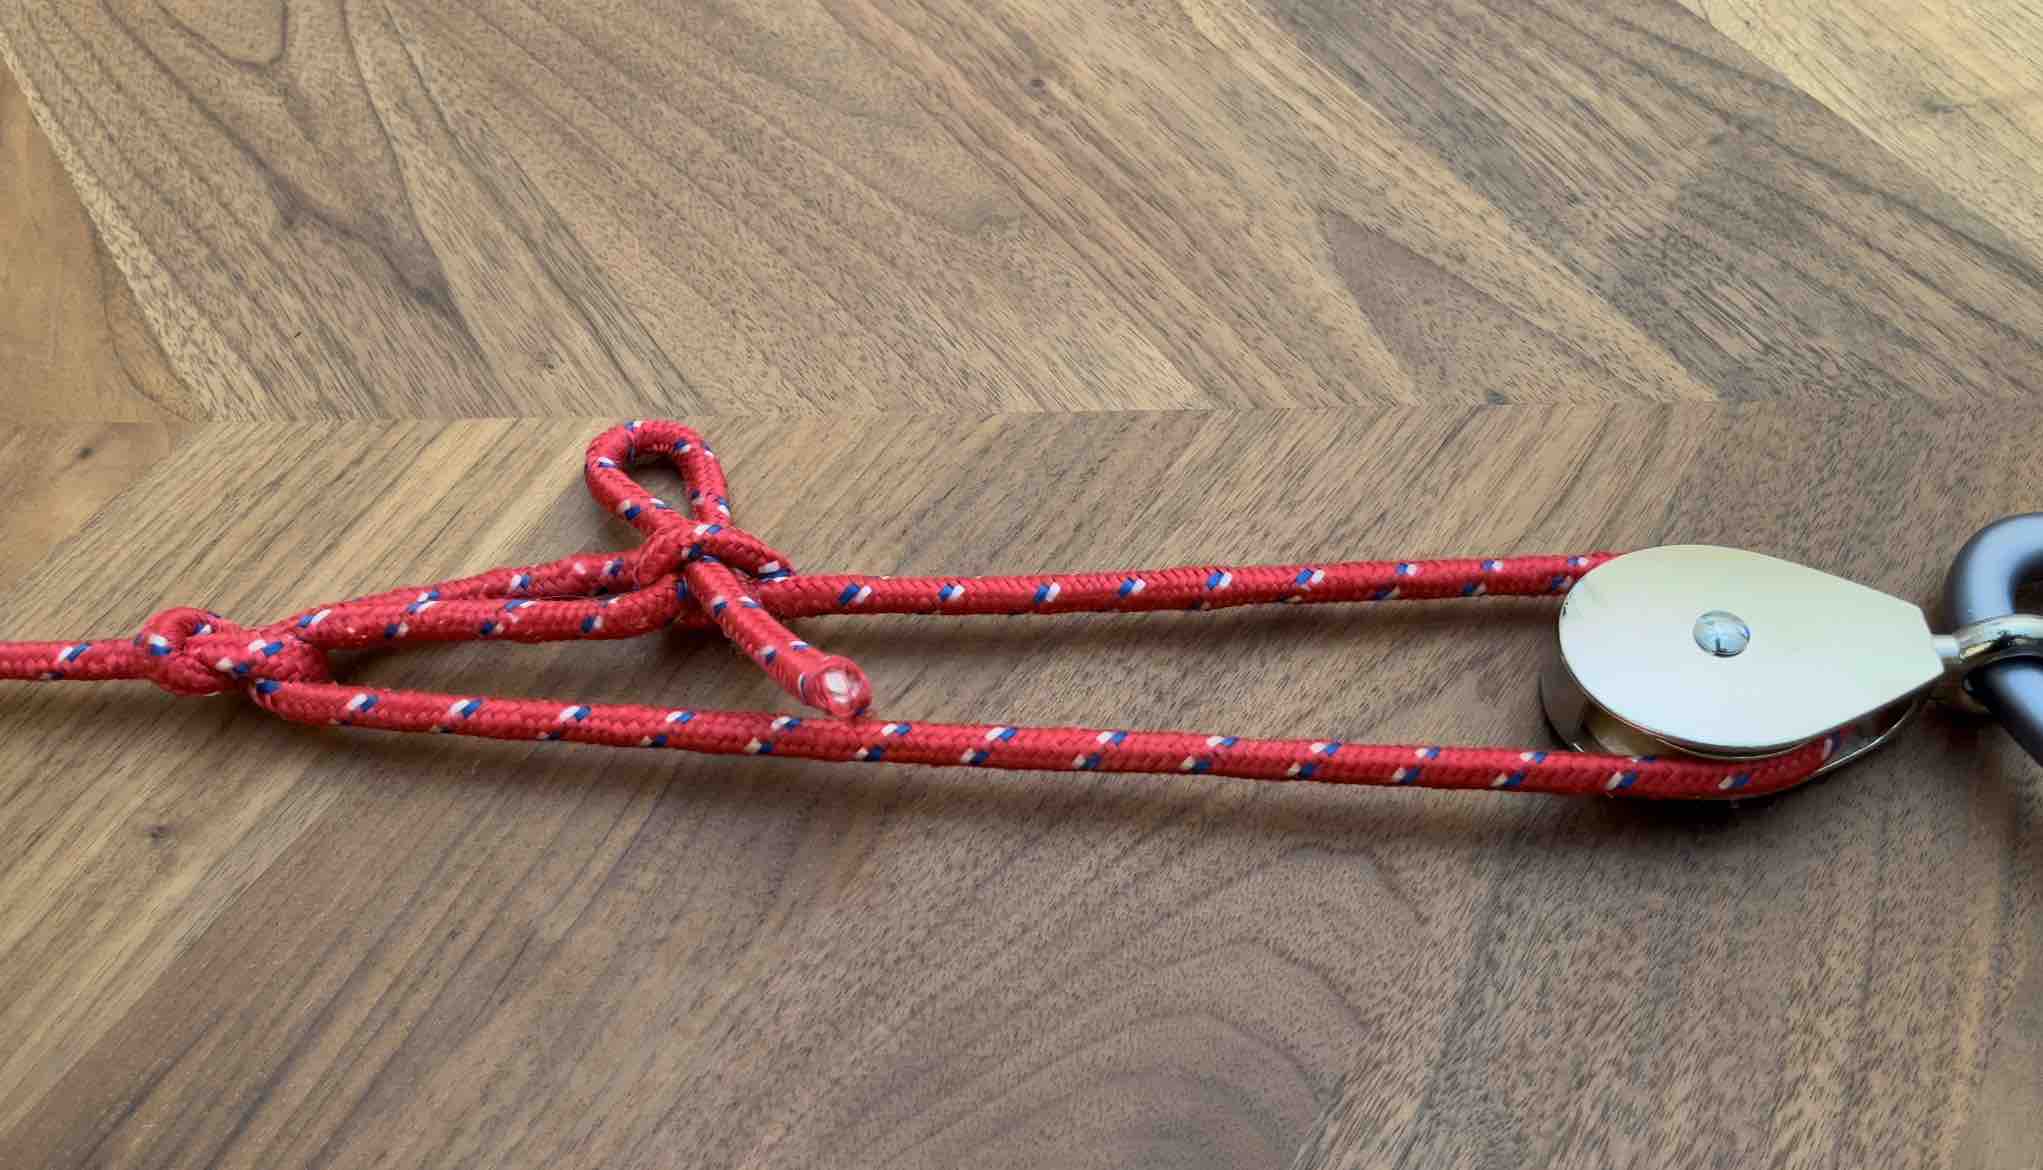 camping knots trucker's hitch tension rope